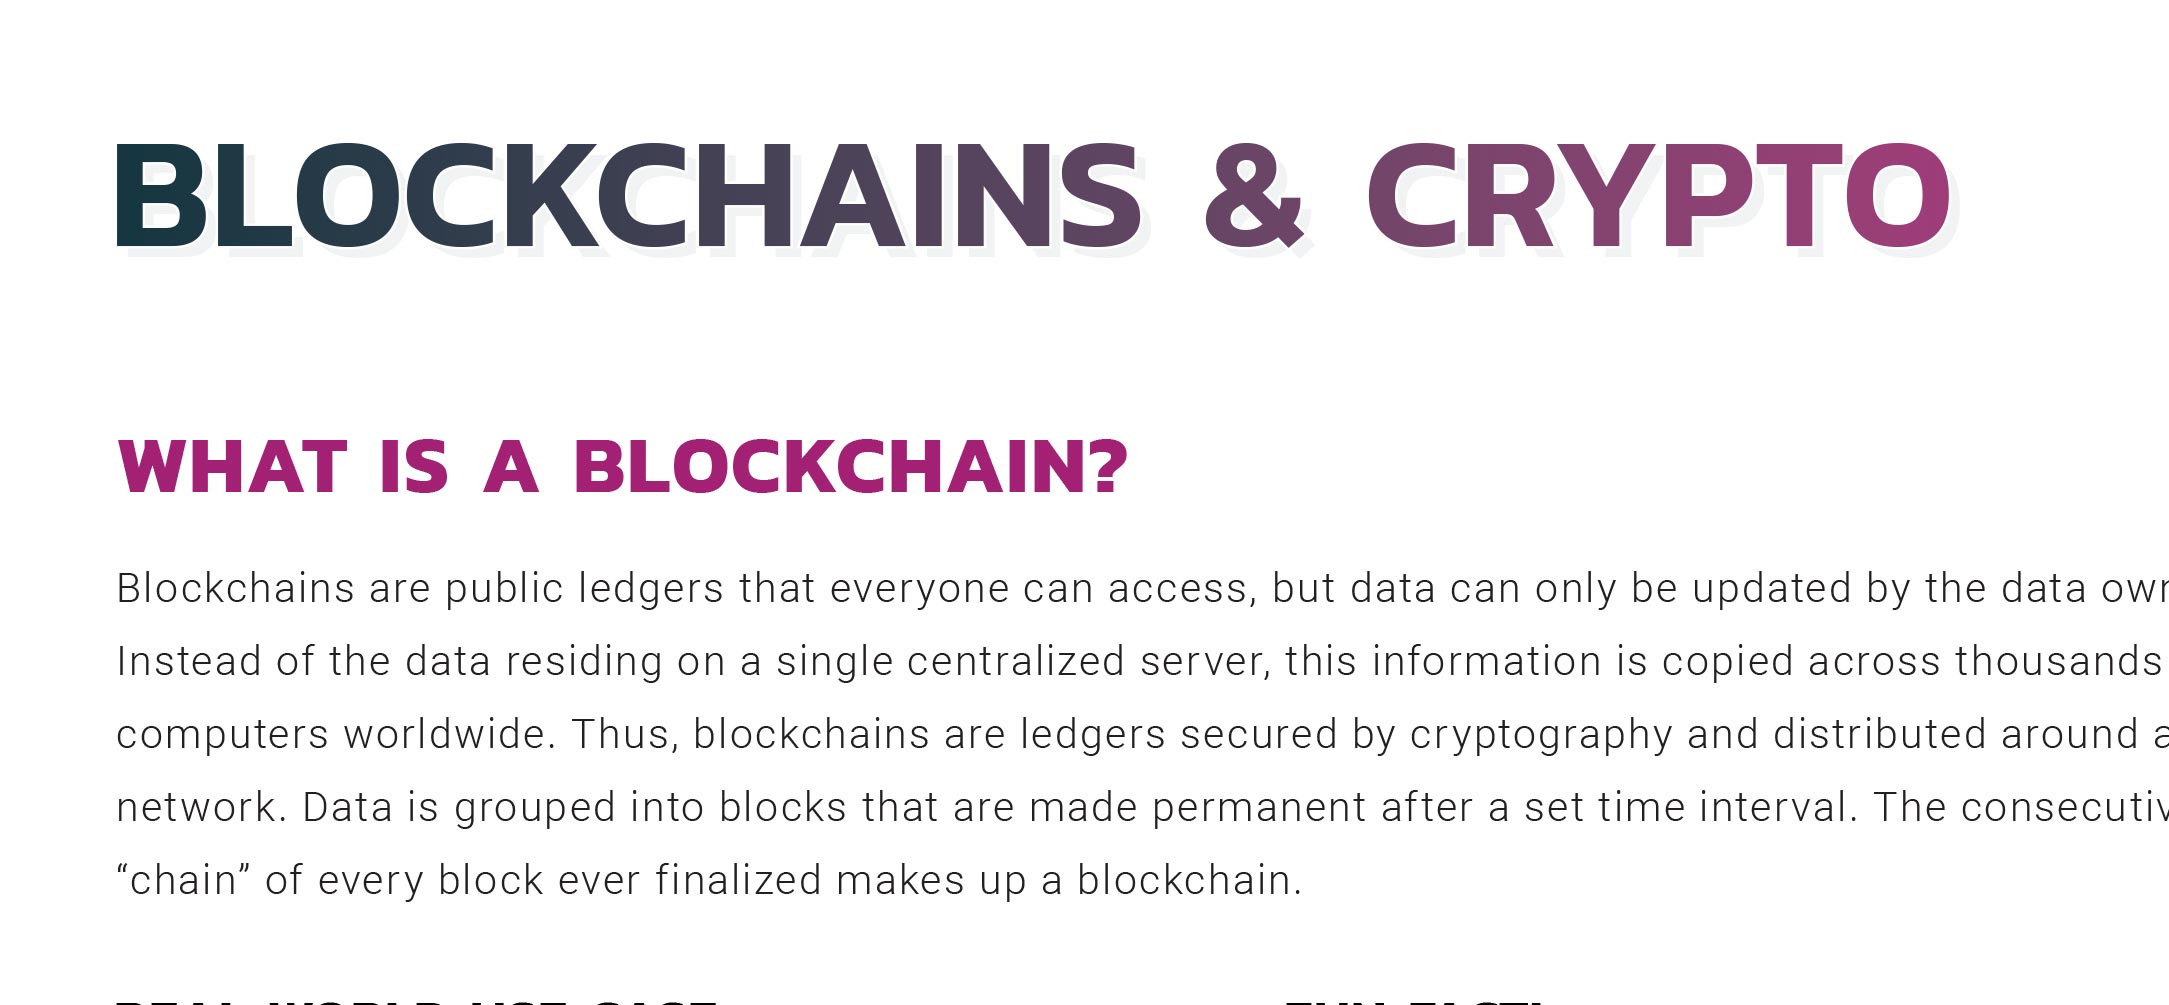 What are blockchains and cryptocurrency?